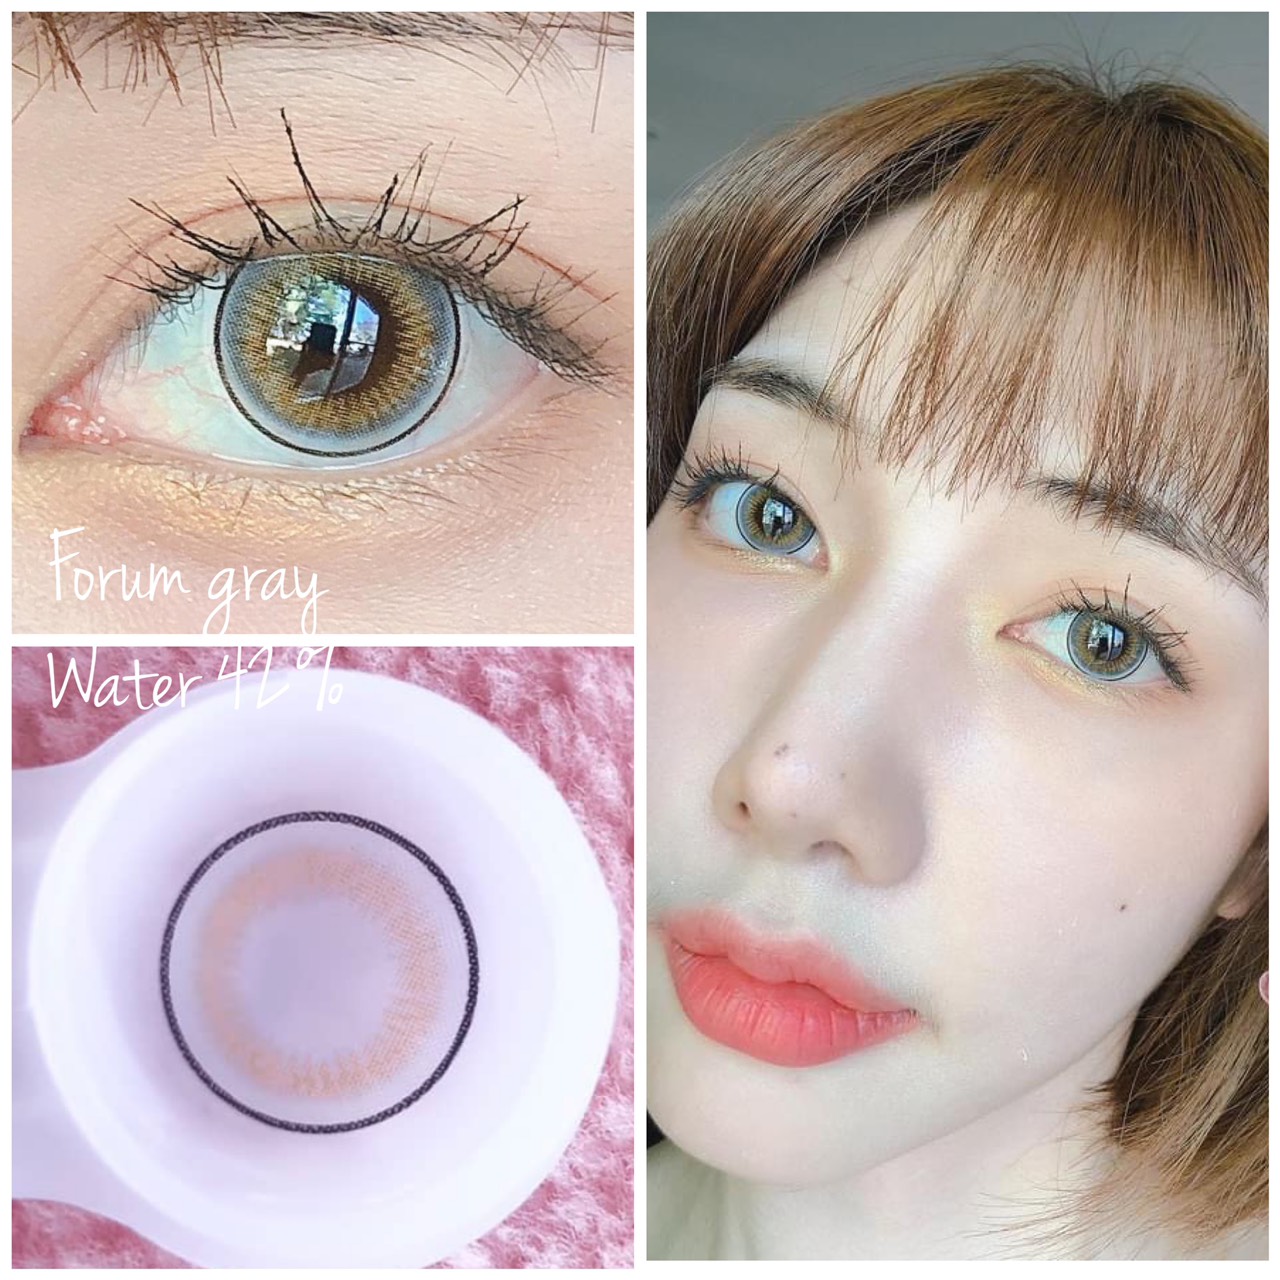 Forum Gray ? Lovely ? Contact Lens บิ๊กอาย สีเทา